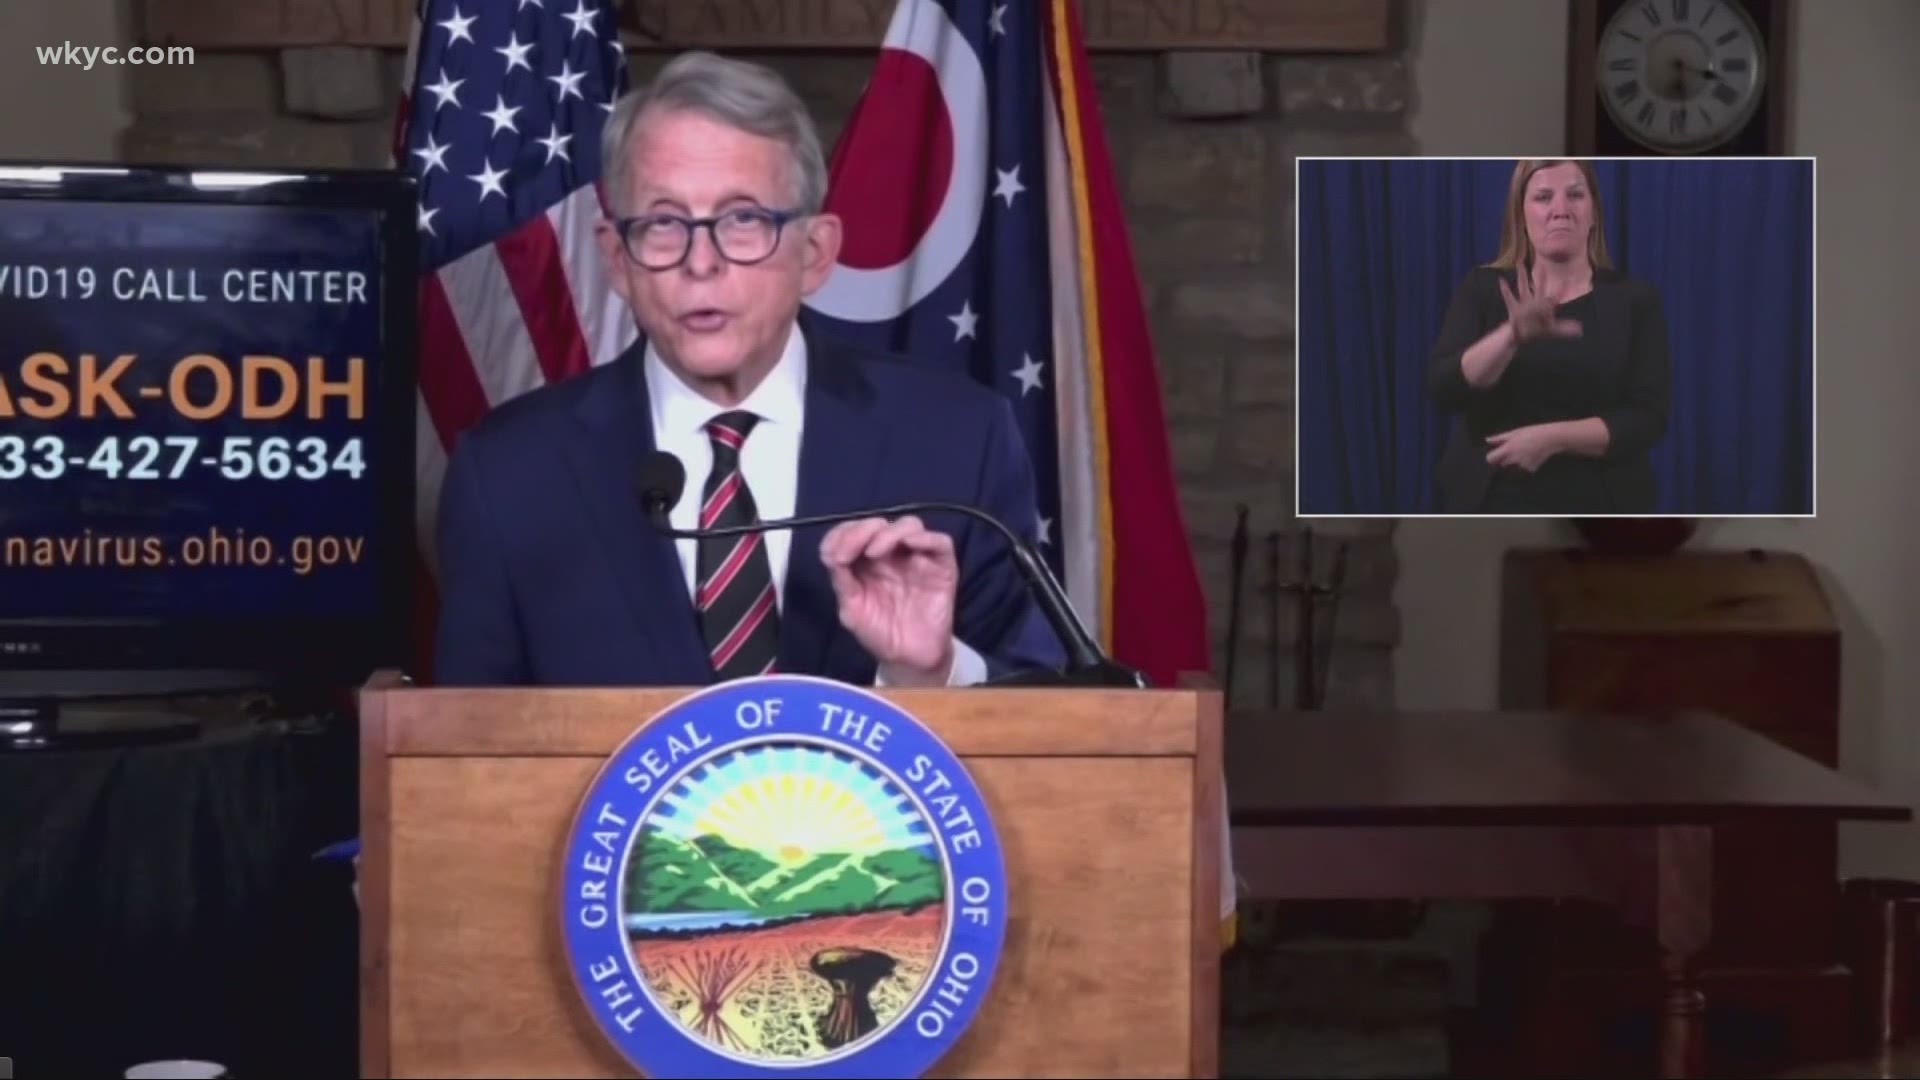 As the US passed more than 300,000 deaths due to COVID-19, there was finally some good news on Monday. Laura Caso has a rundown from Gov. DeWine's briefing.